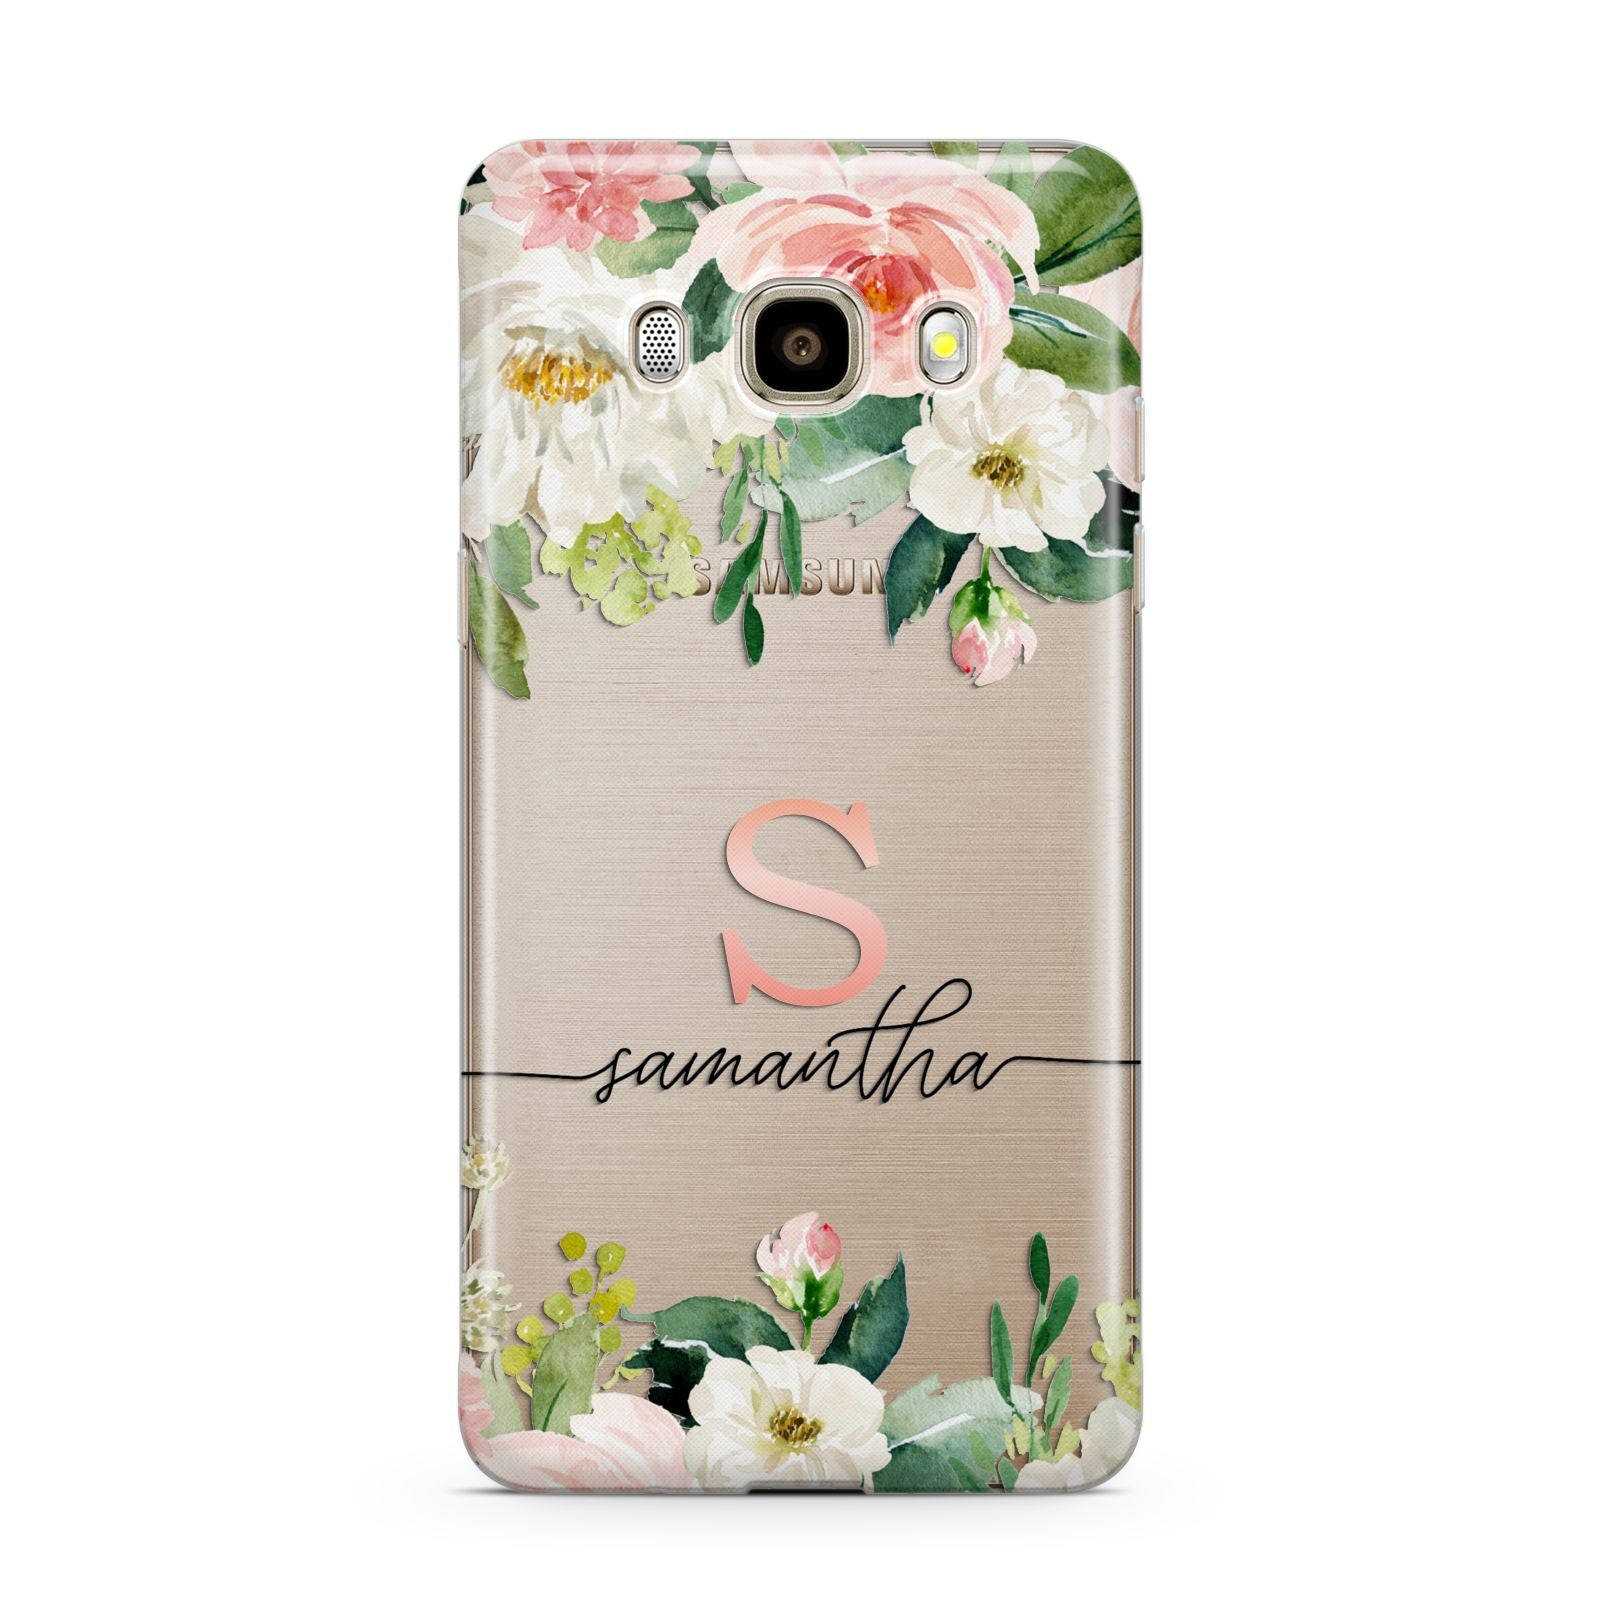 Monogrammed Floral Roses Samsung Galaxy J7 2016 Case on gold phone